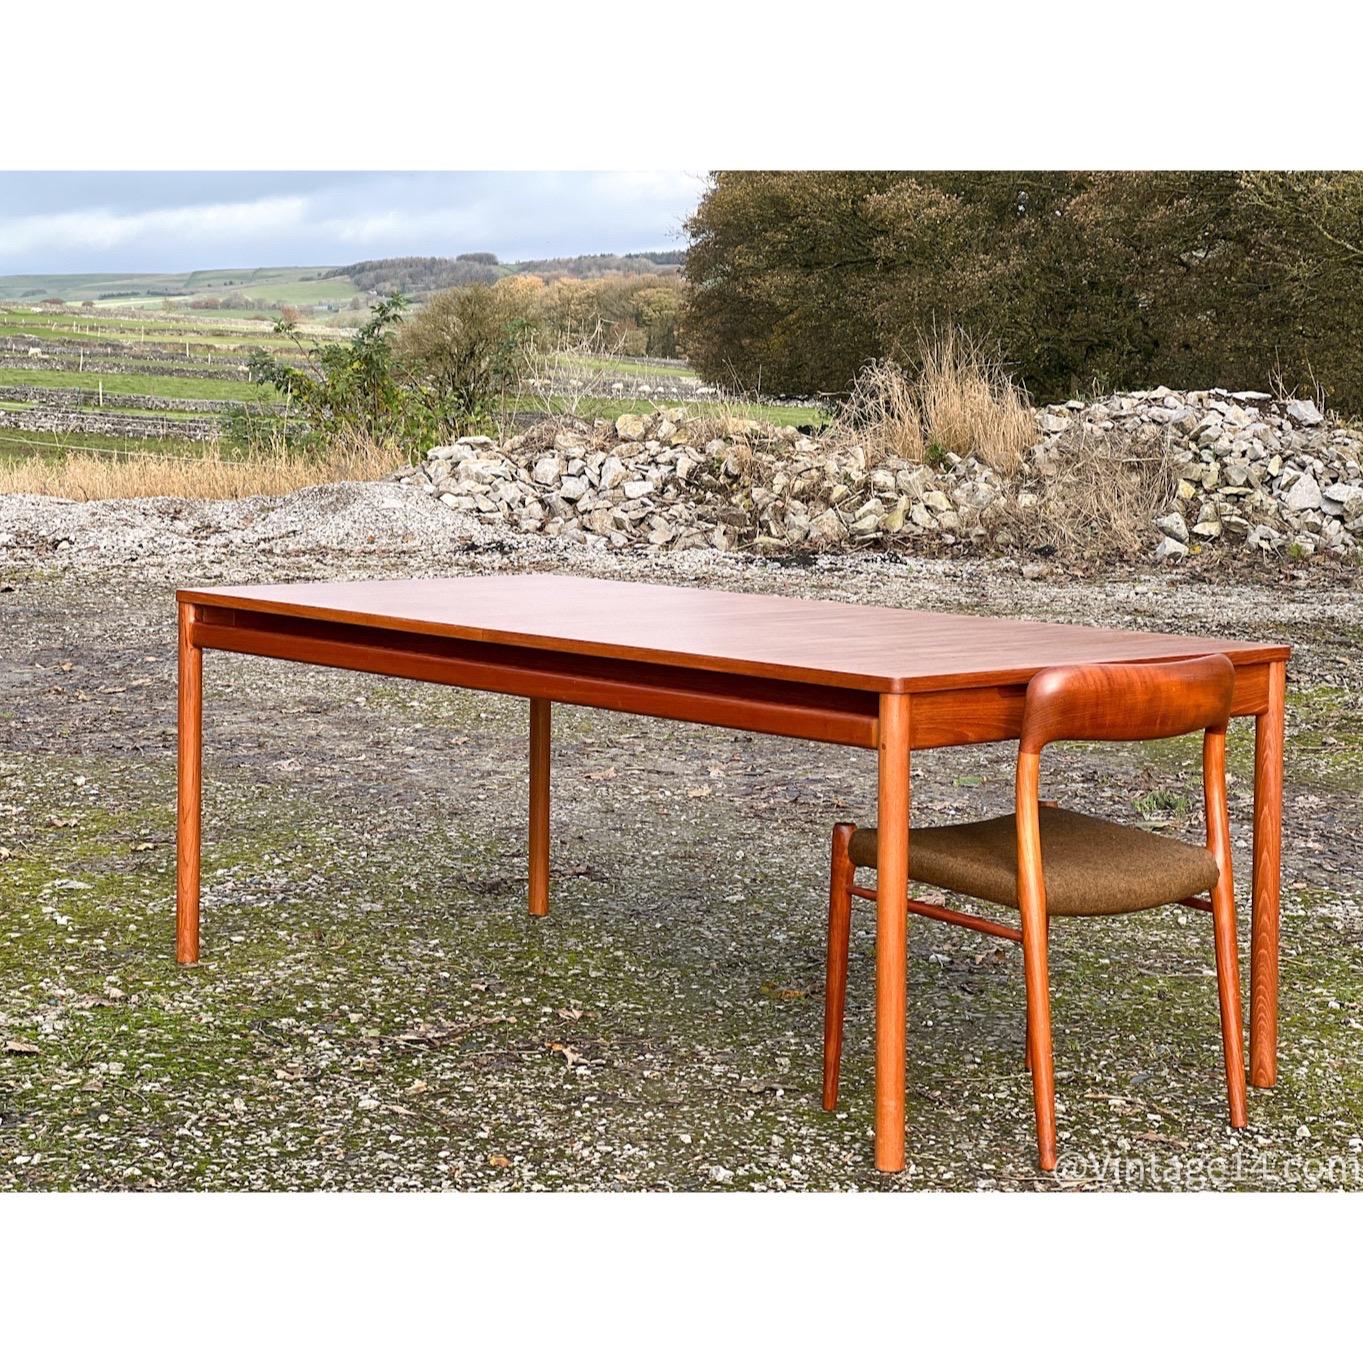 Tom Robertson designed this large dining table for A.H. McIntosh in the early ’70s, in Scotland. In this table we see how Tom Robertson’s designs become more clean and with a more powerful presence, the “less is more” from Mies Van der Rohe is a key